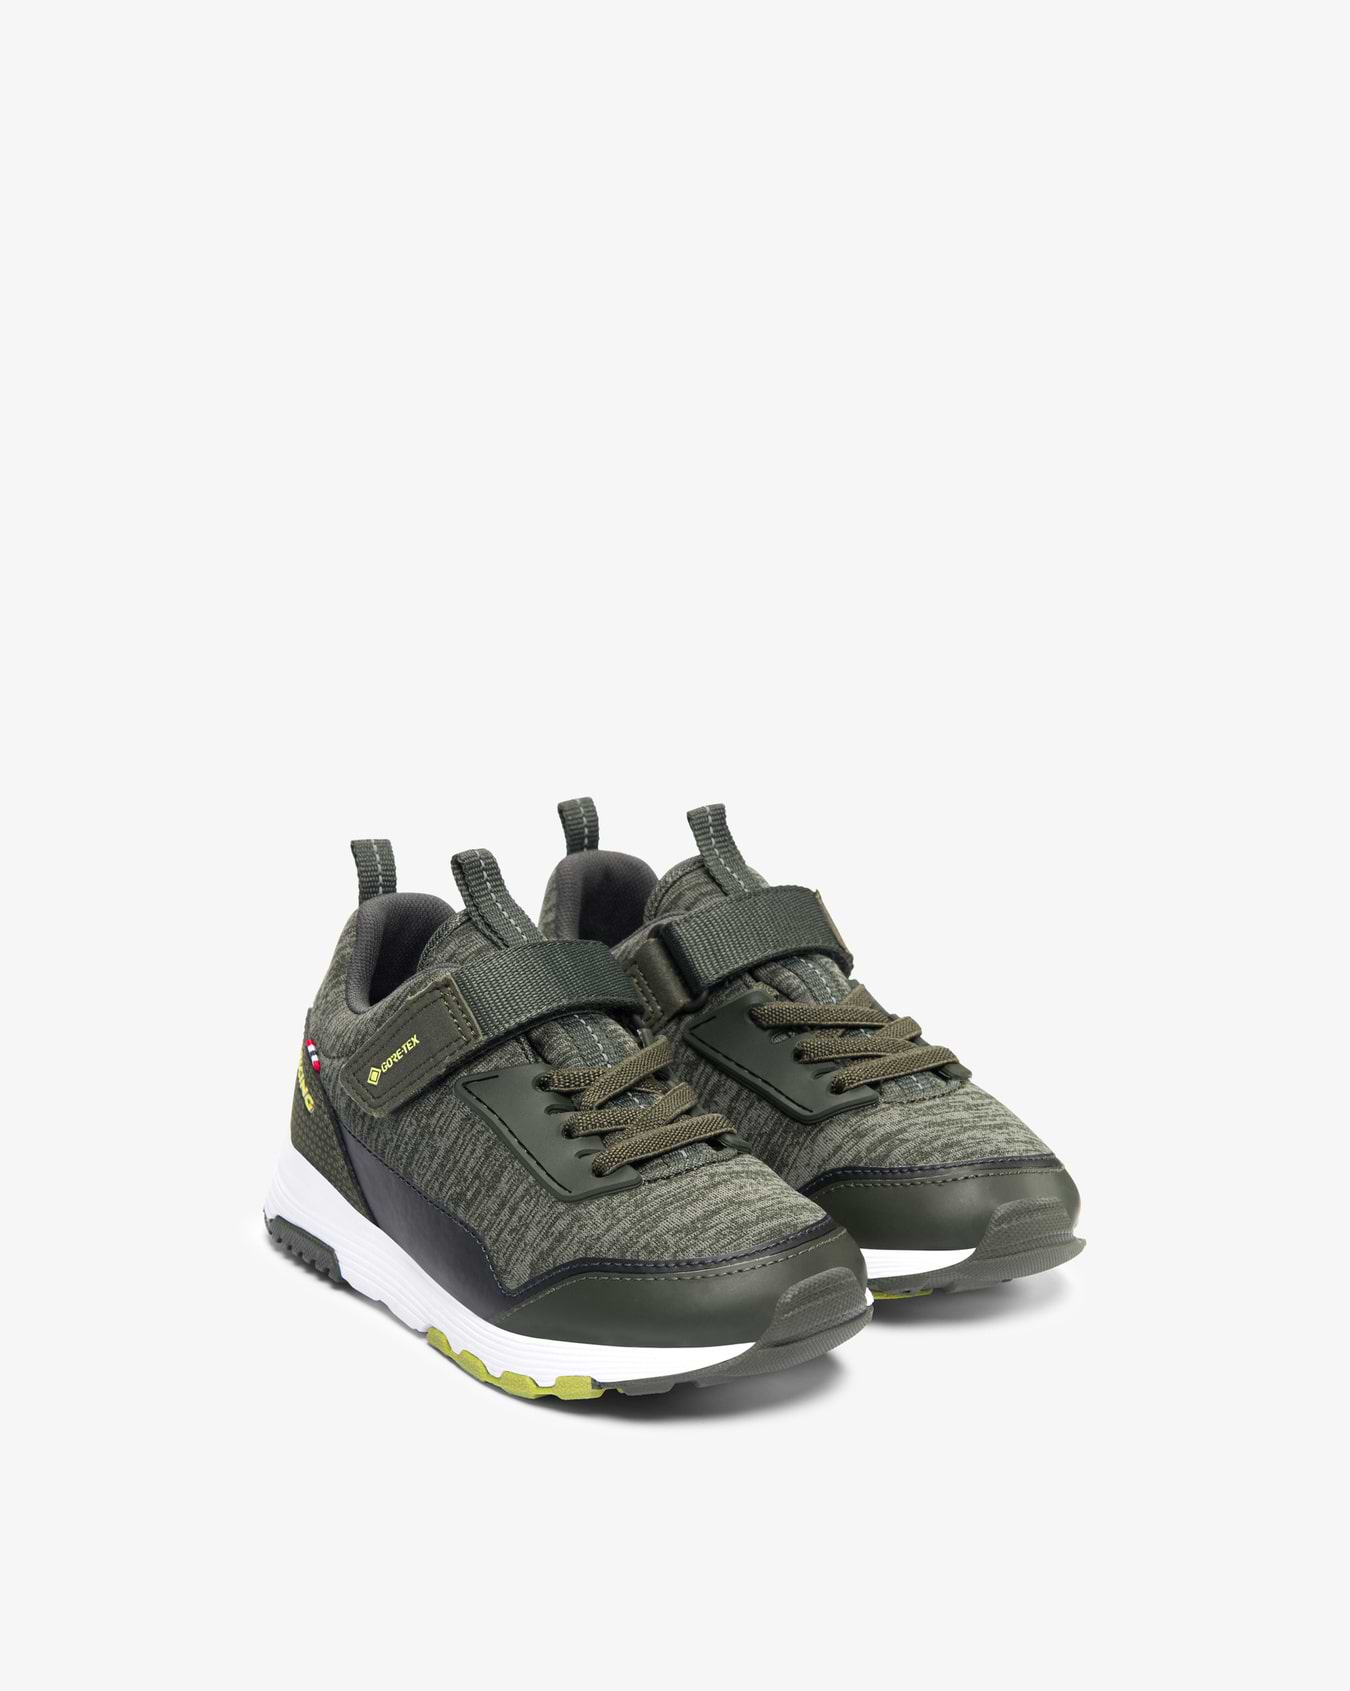 Arendal GTX Olive/Lime